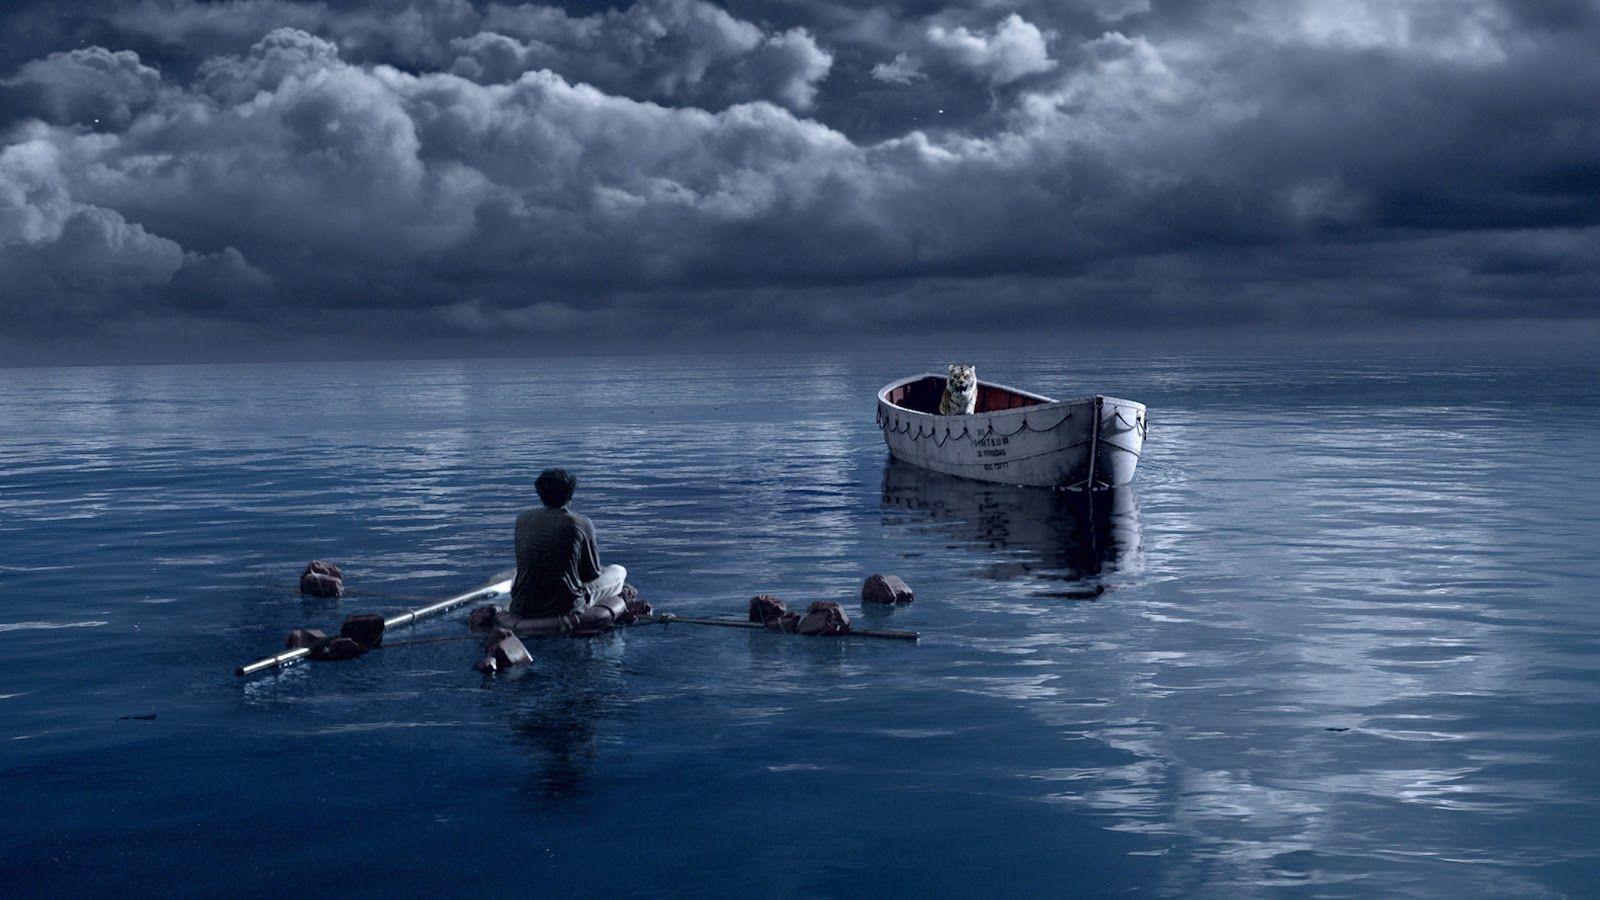 reflection about life of pi